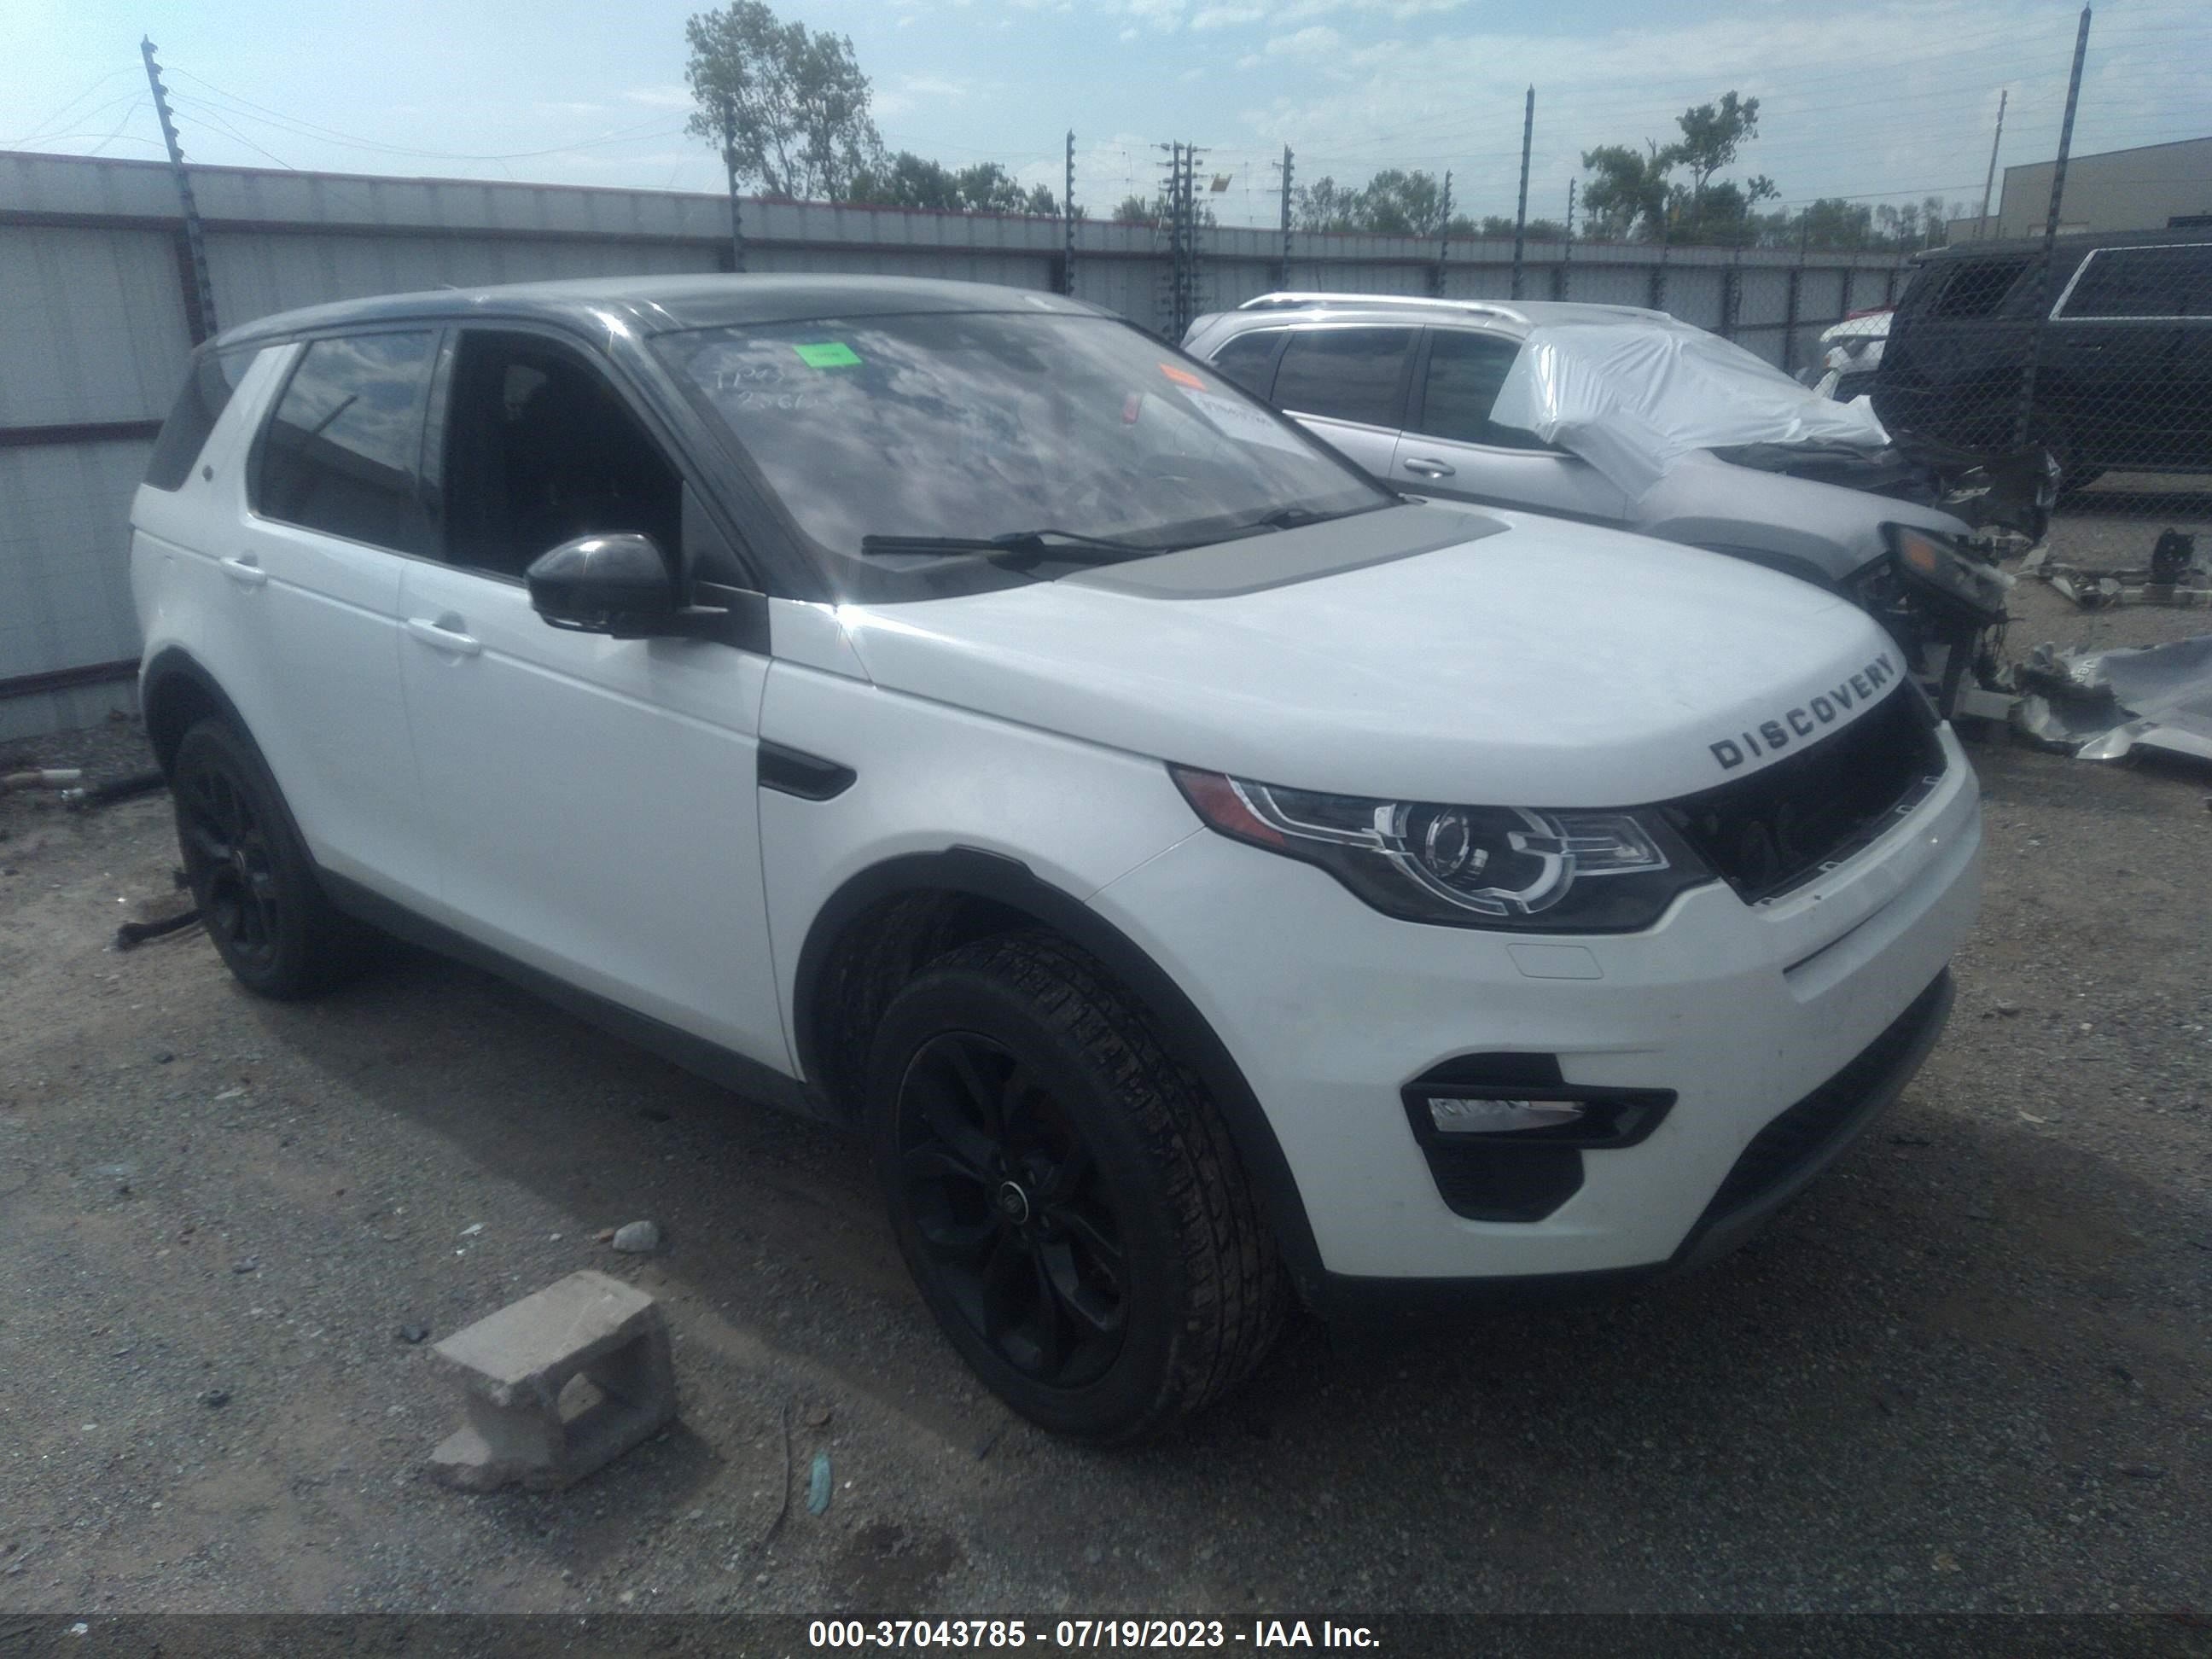 VIN: SALCR2RX9JH747820 - land rover discovery sport